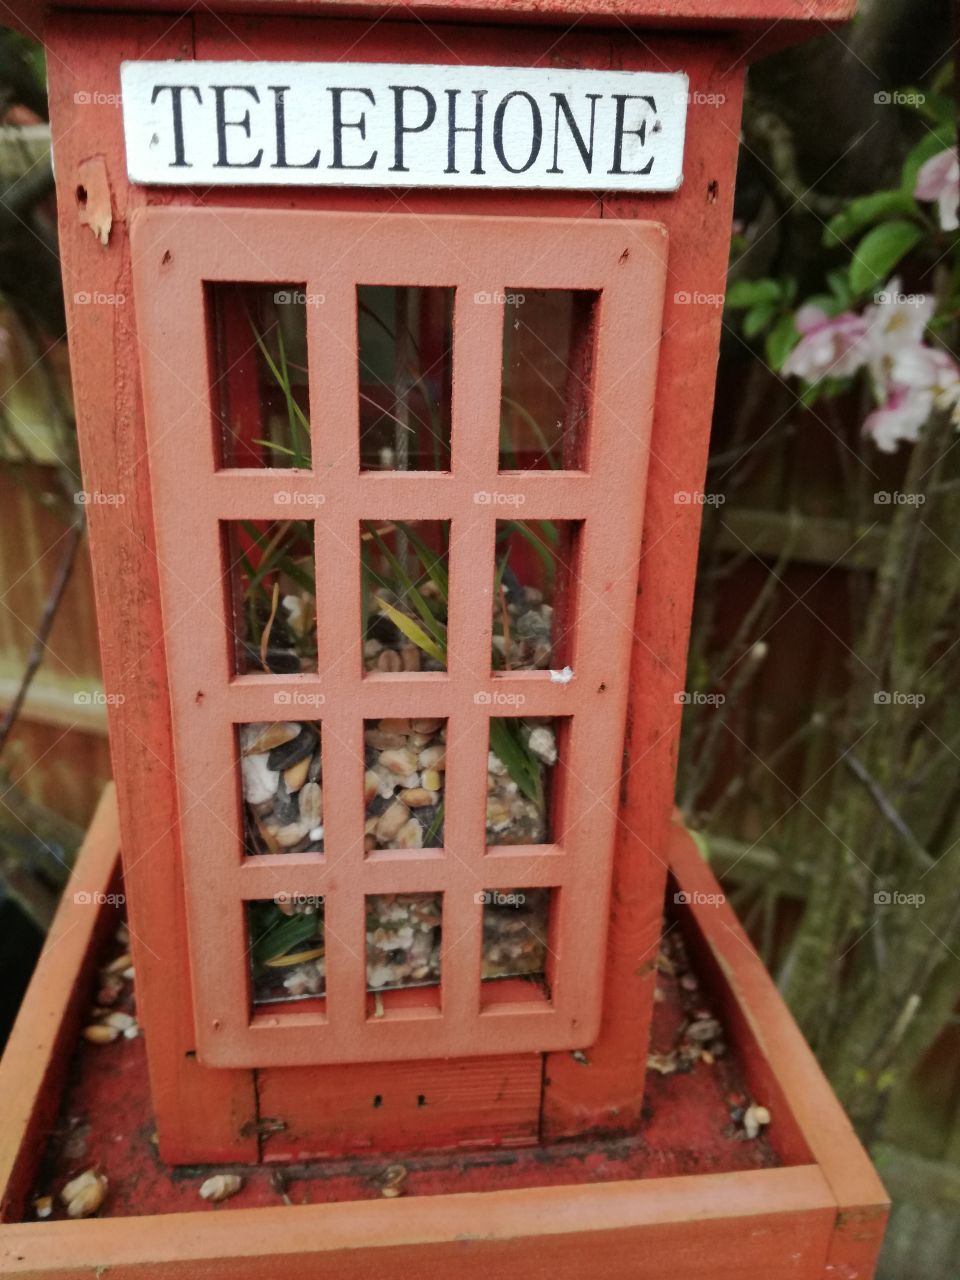 A mini phone box bird feeder with seeds in it.